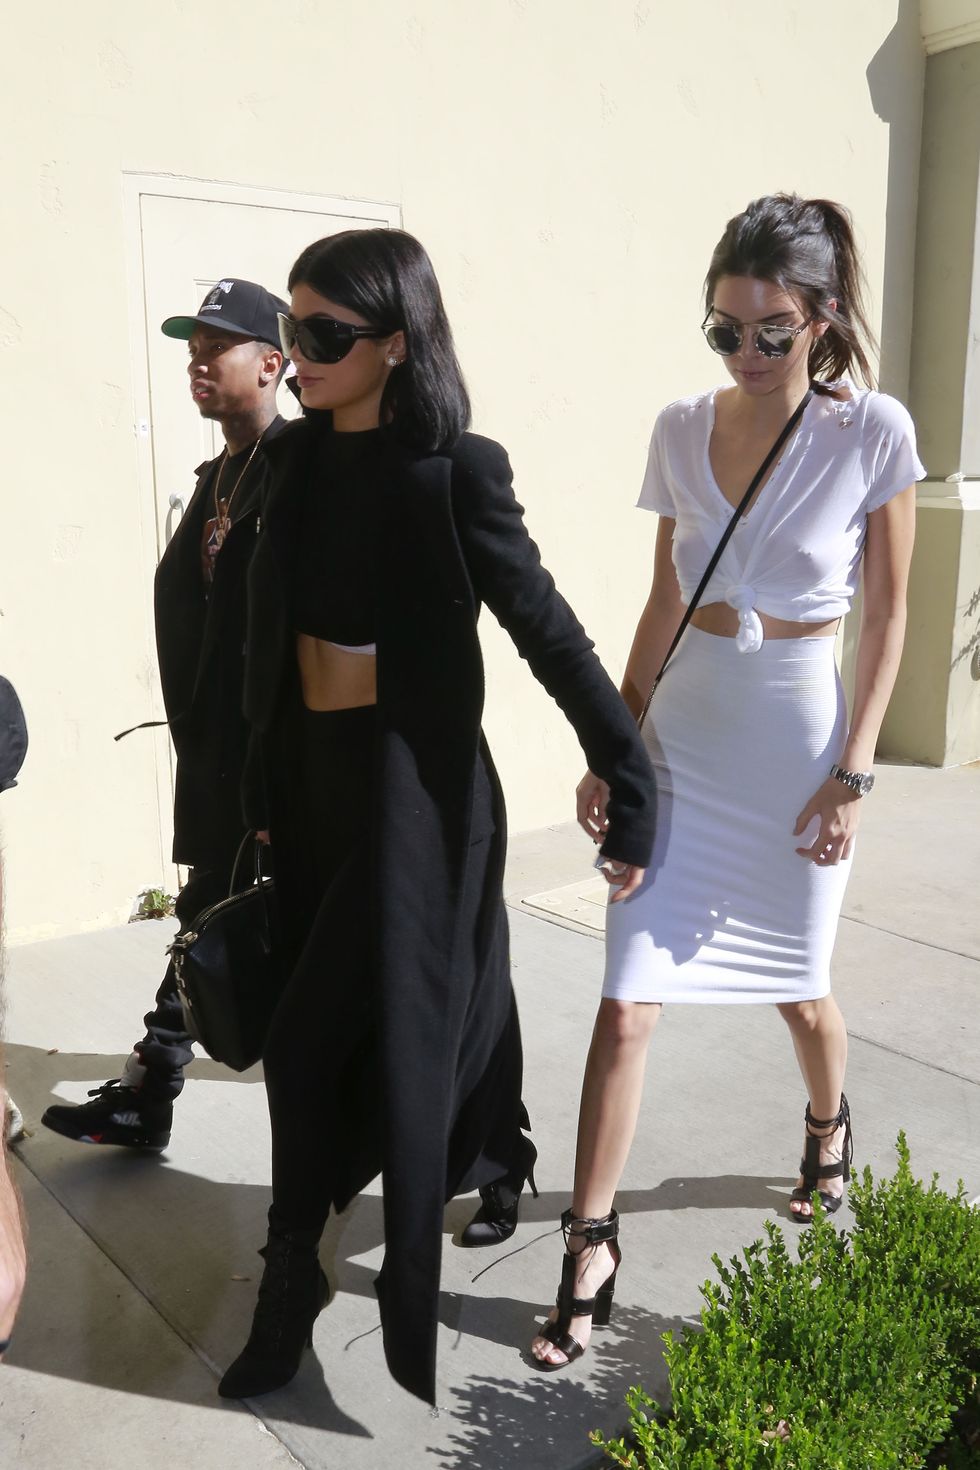 Kylie Jenner demonstrates a new way to style innerwear as outerwear